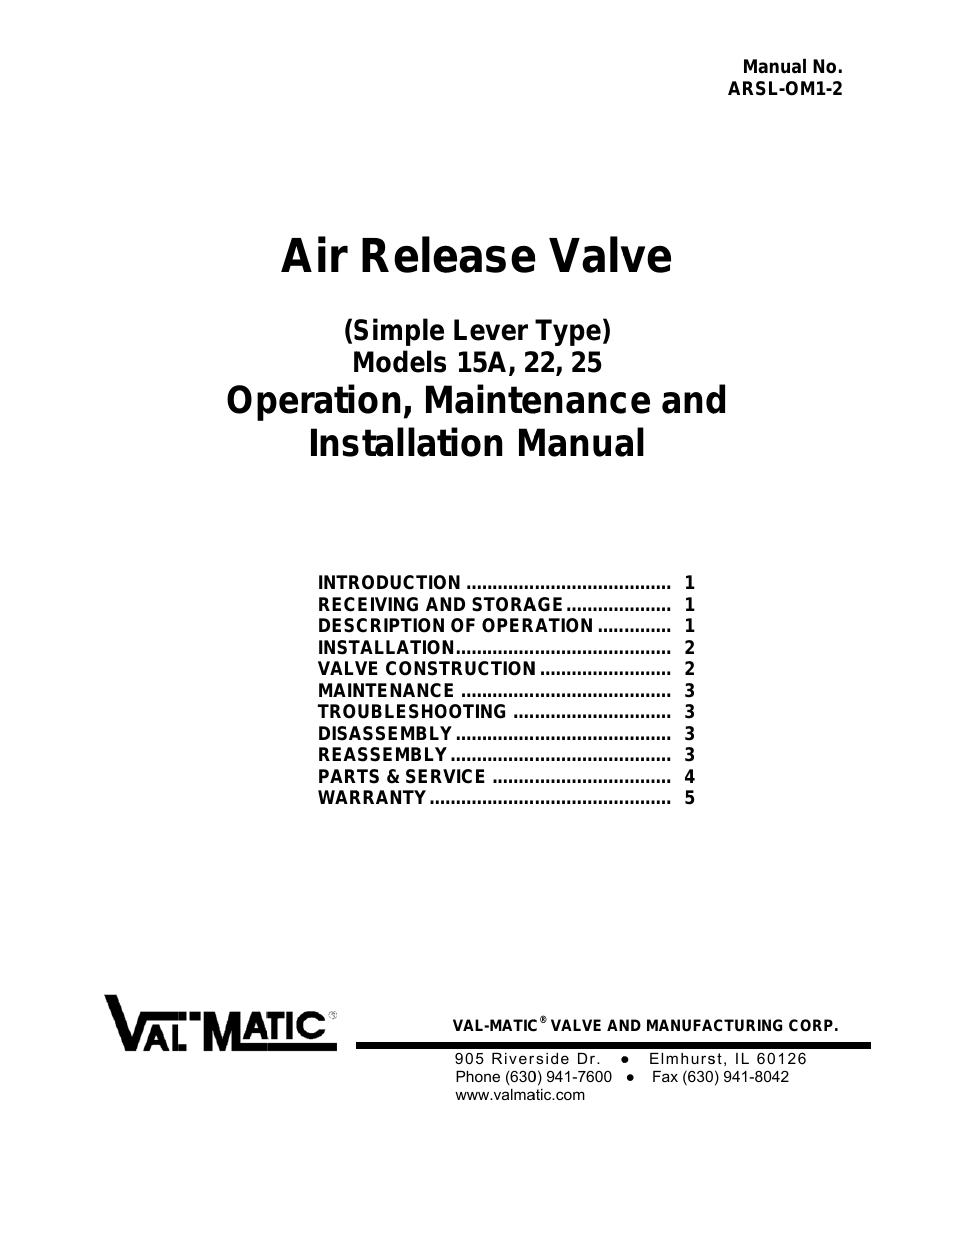 22 Air Release Valve (Simple Lever Type)